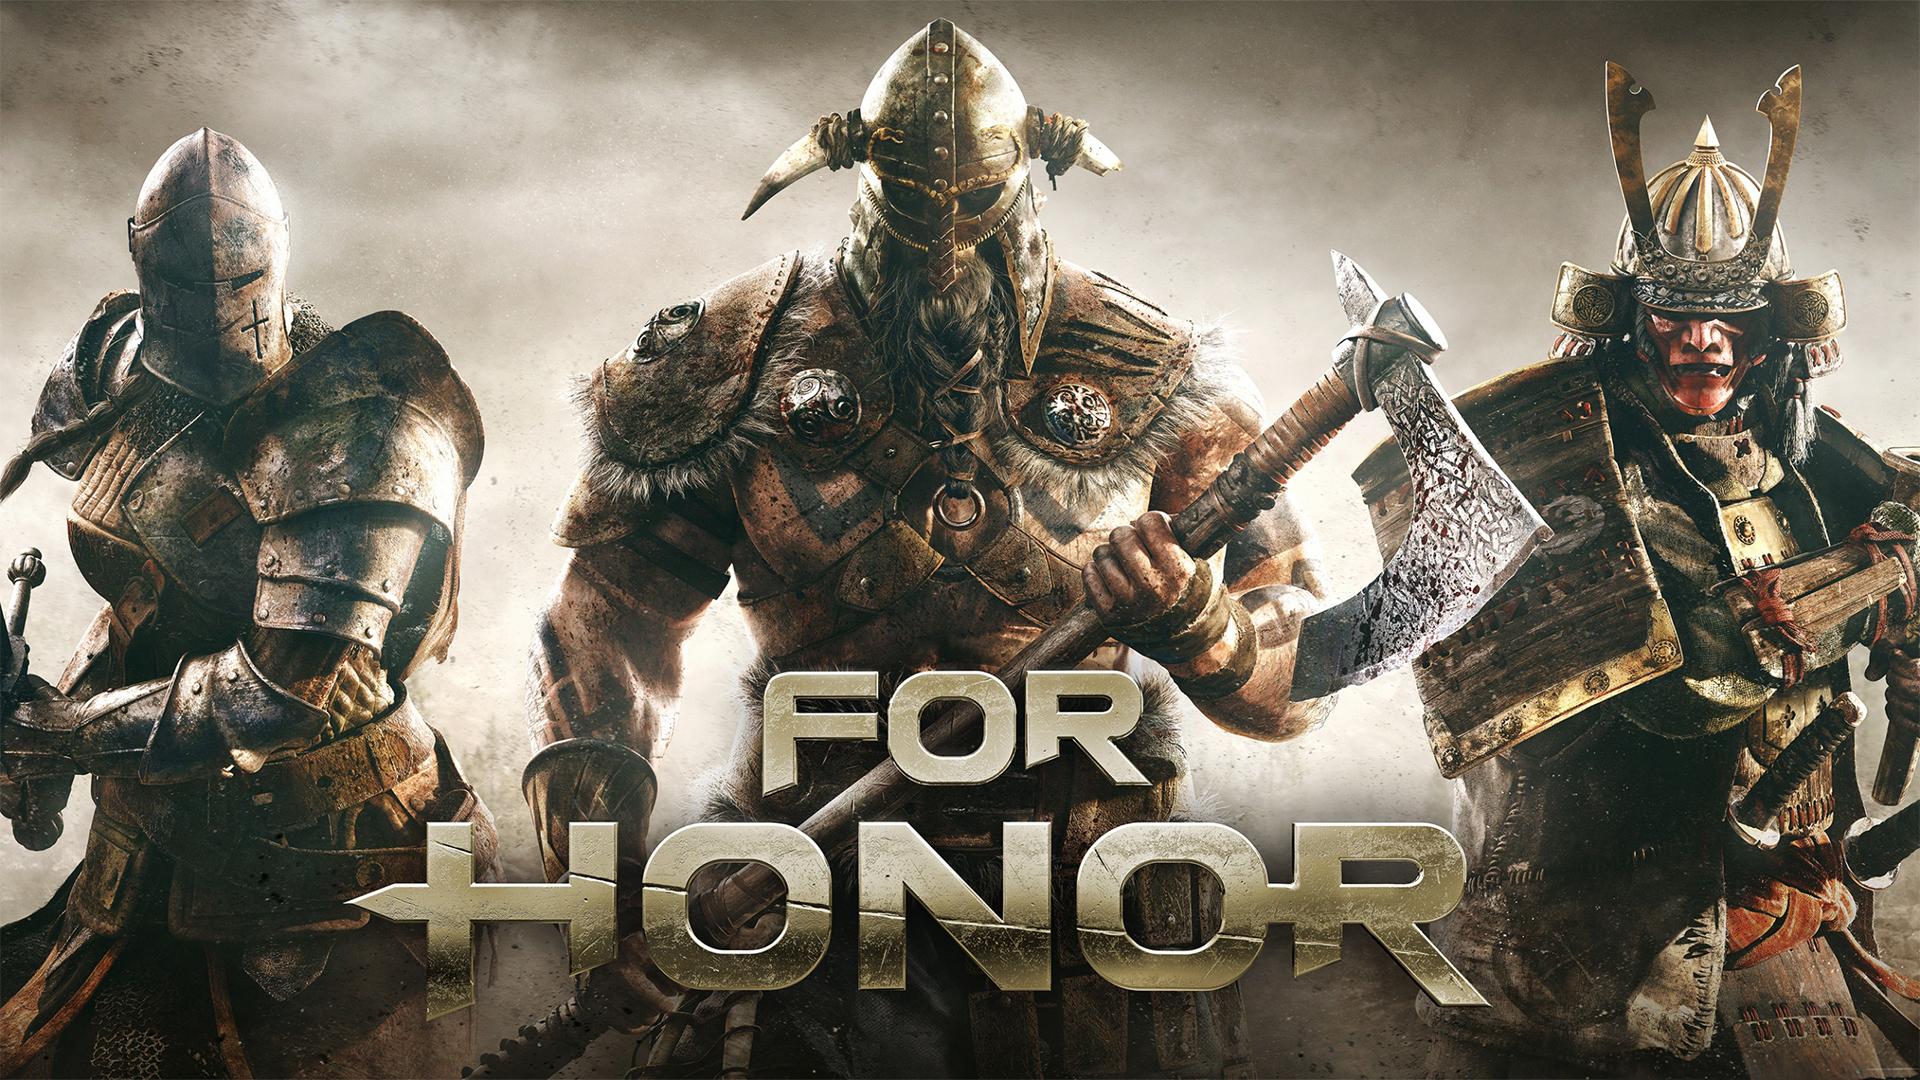 For Honor thumbnail featuring historic warriors